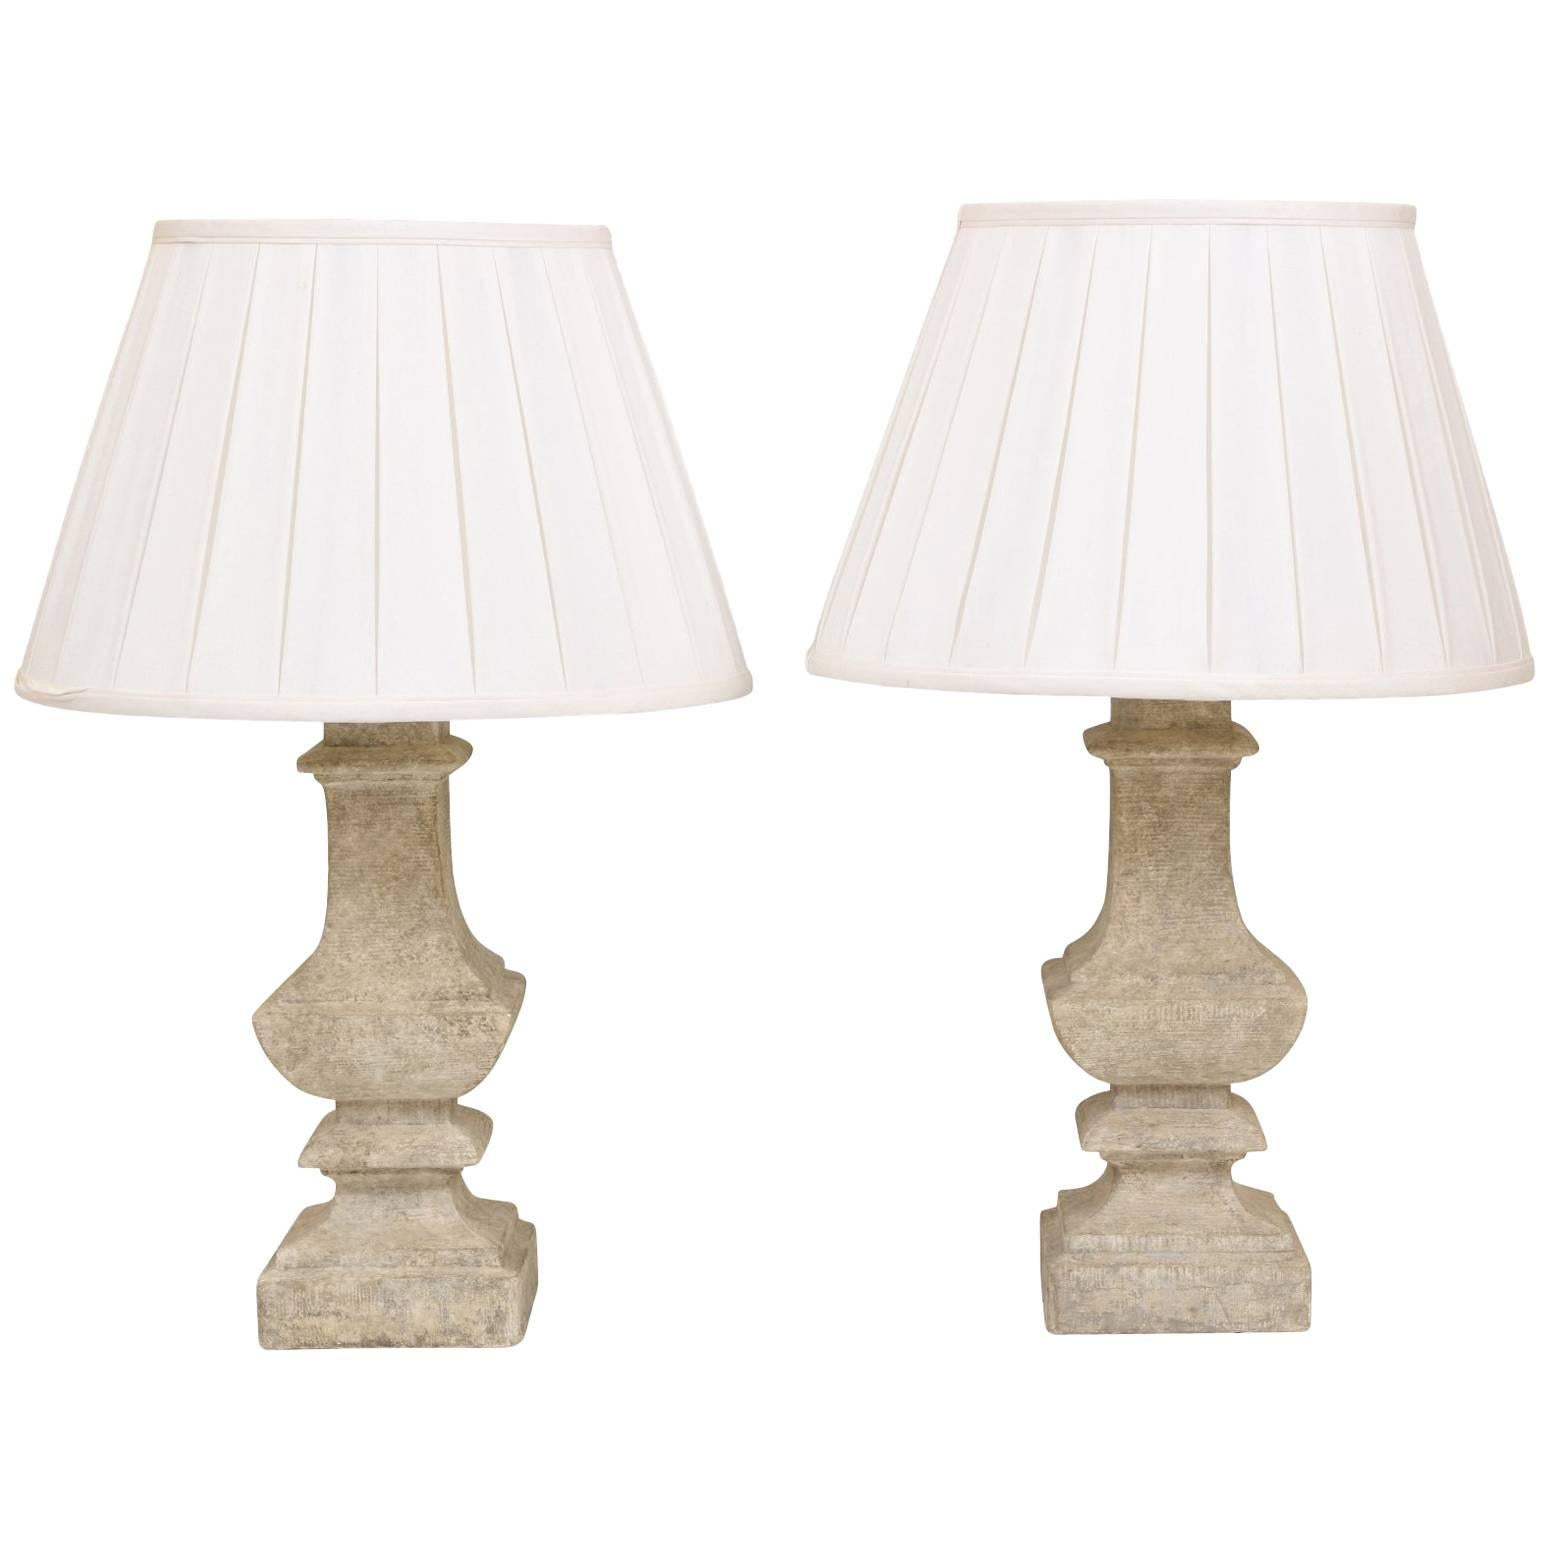 Pair of Carved Stone Baluster Lamps with Silk Shades